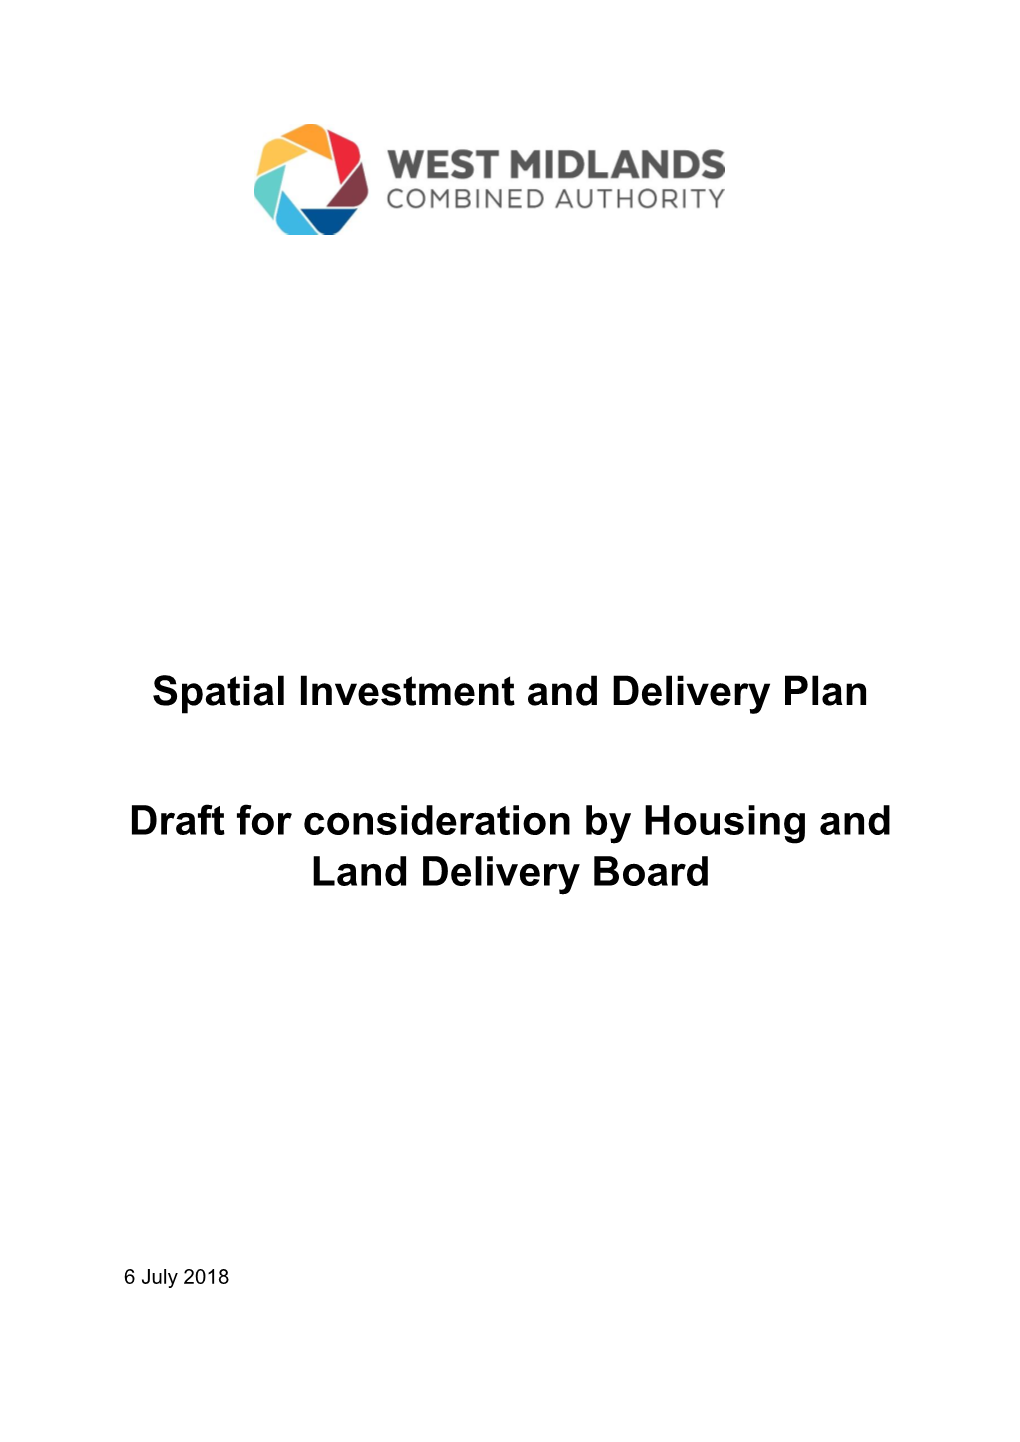 Download AD37 Draft Spatial Investment and Delivery Plan For